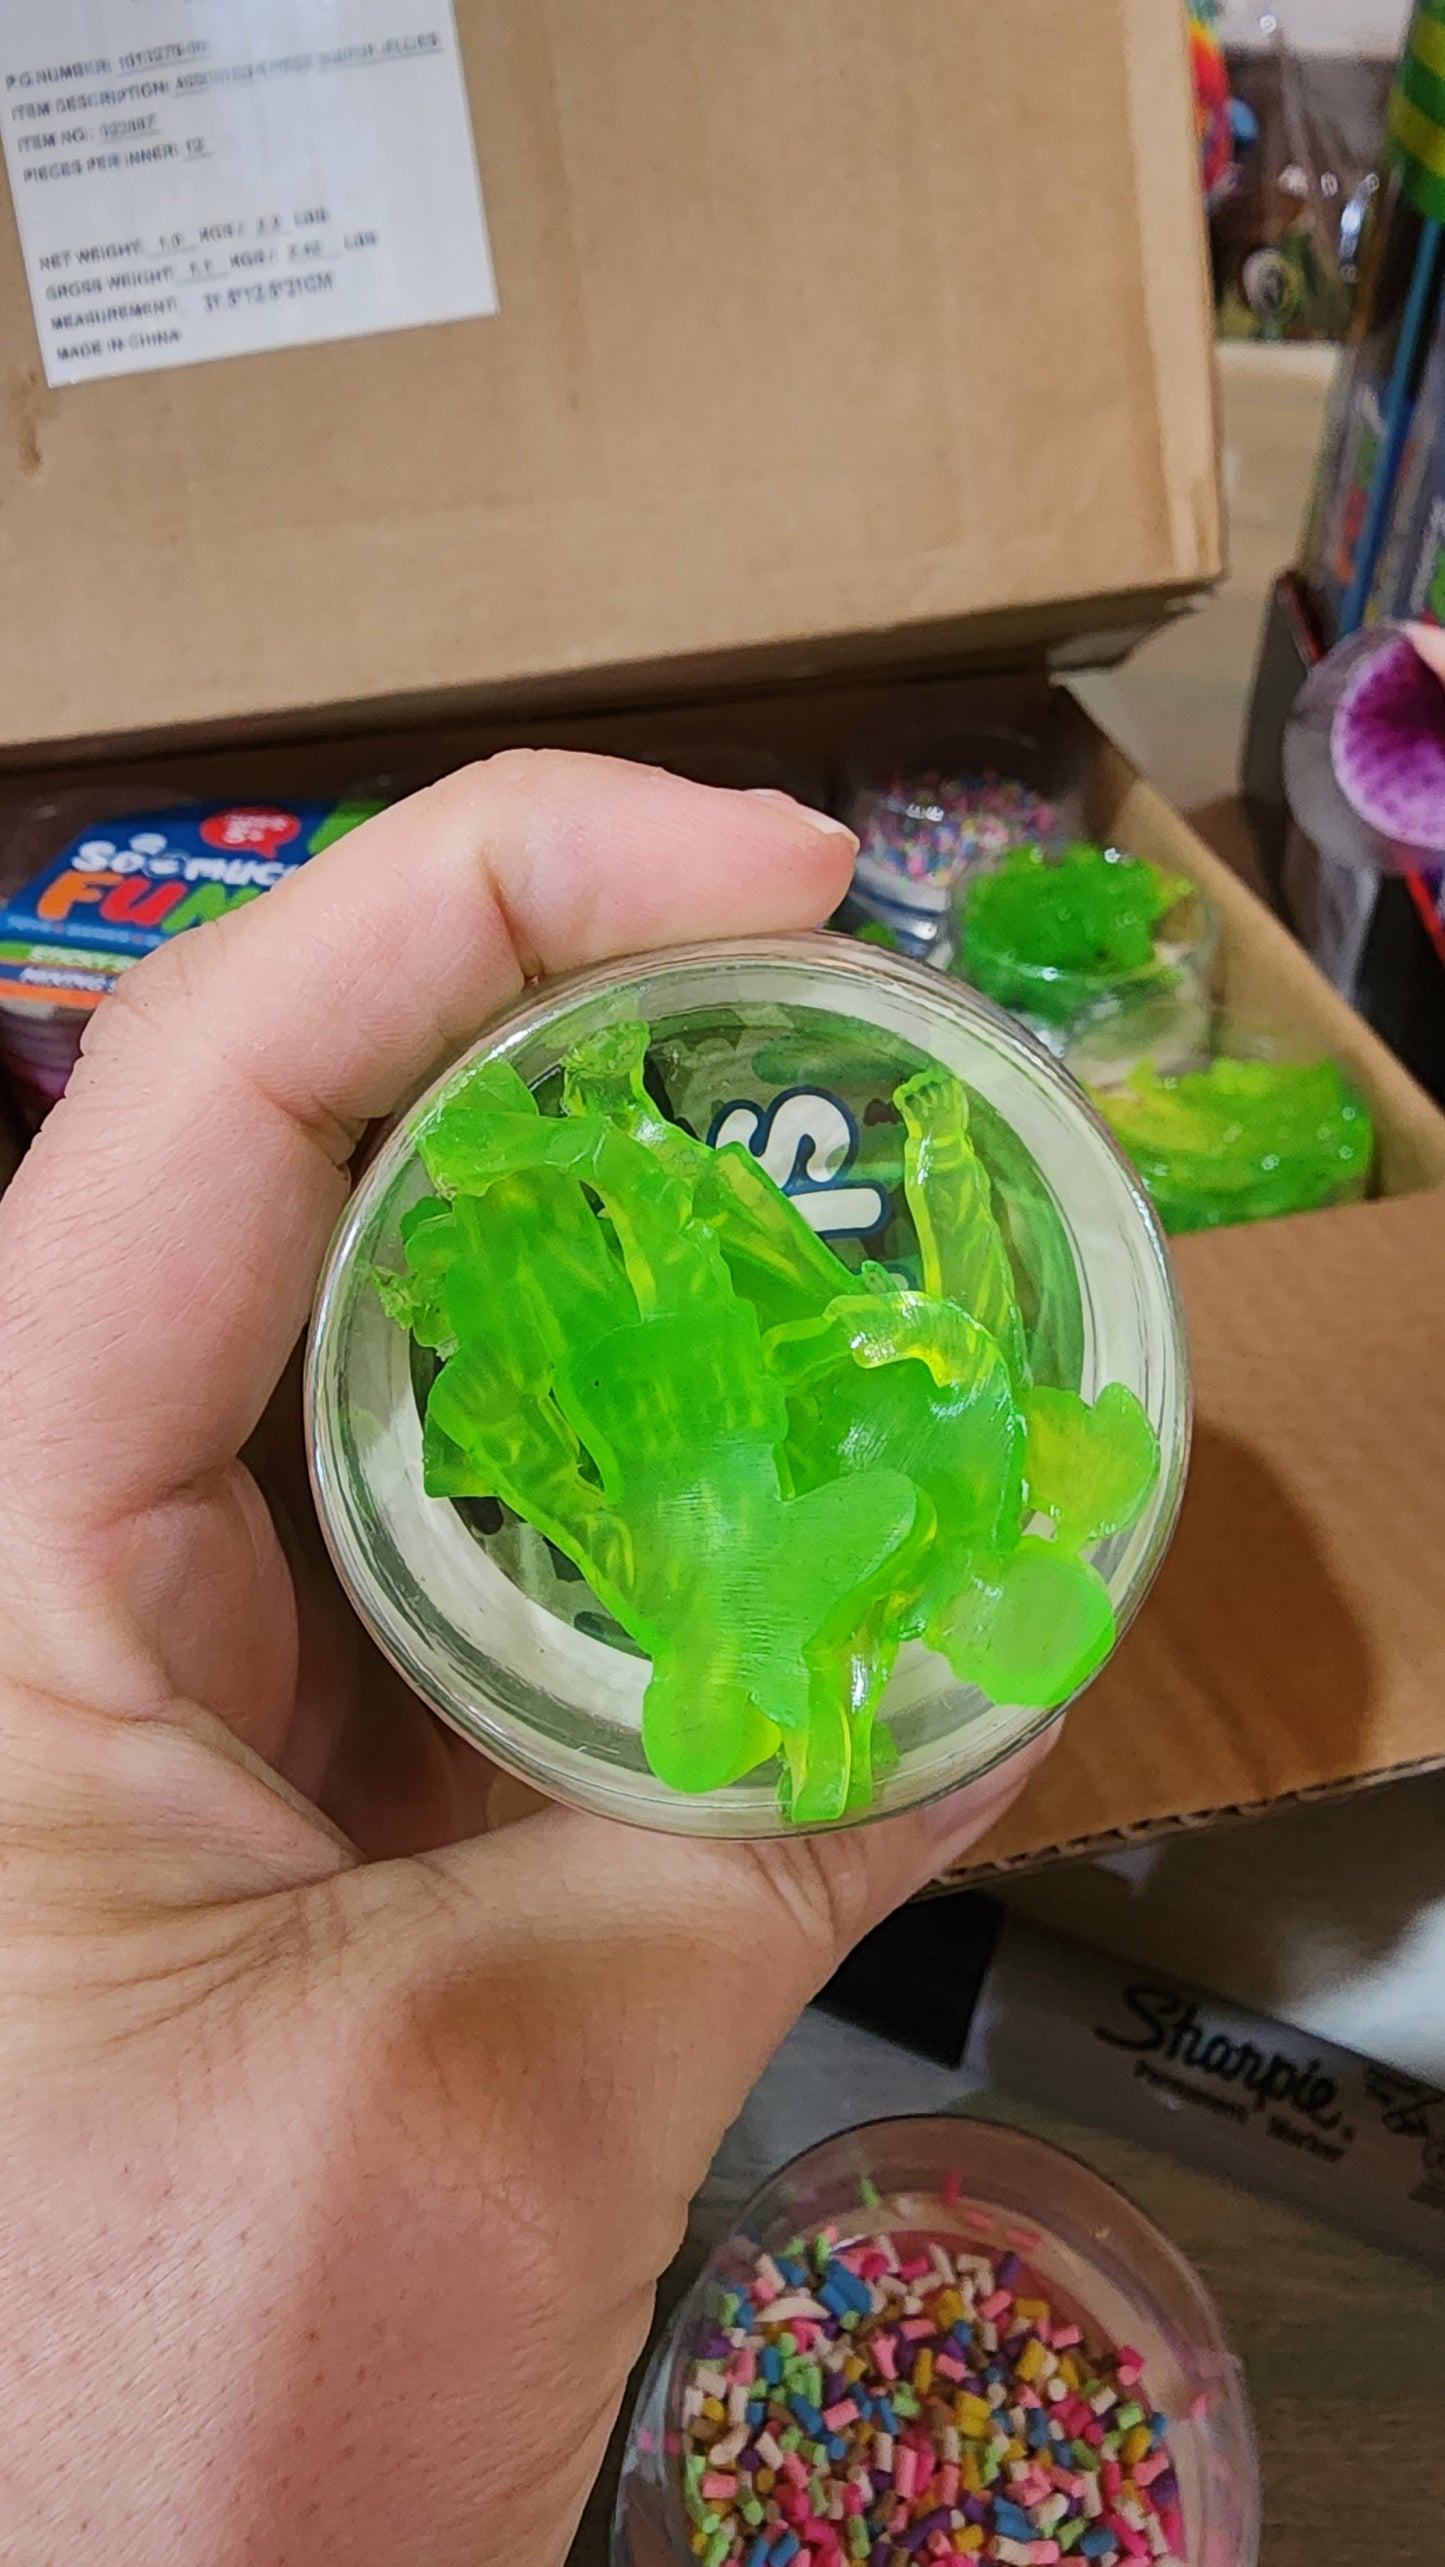 SLIME WITH MIX-INS 12 PIECES PER DISPLAY